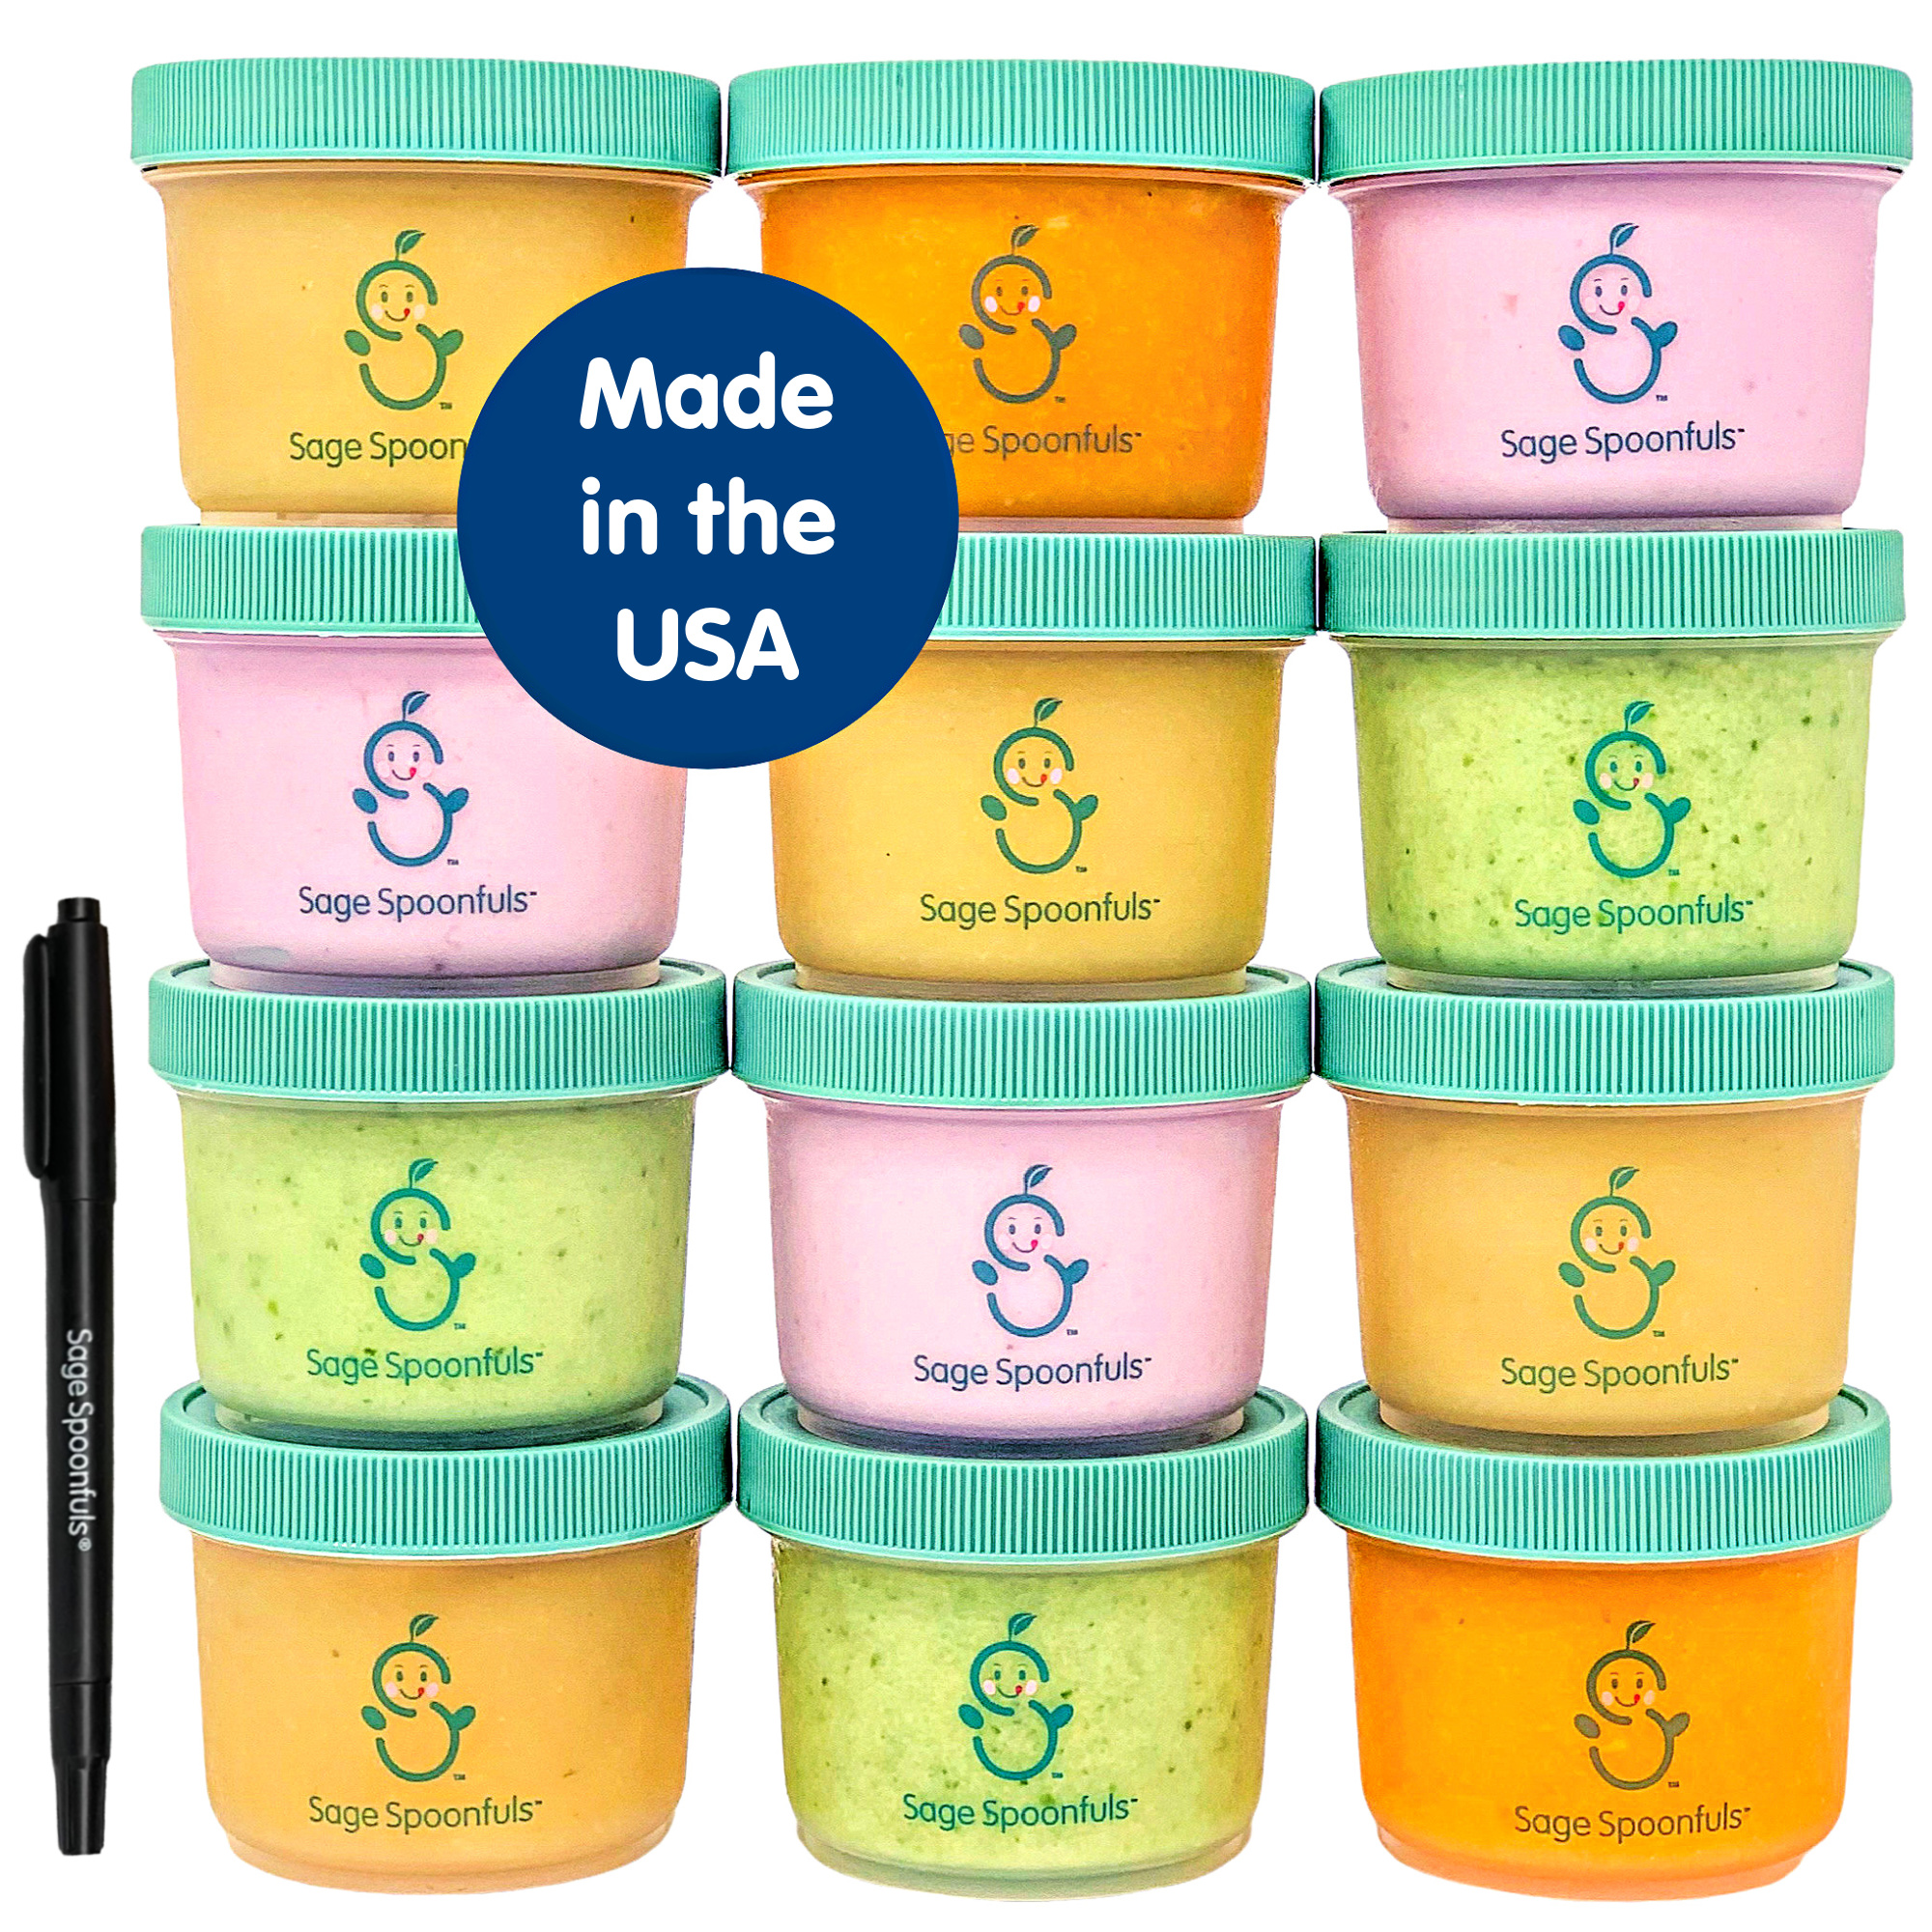 12 PACK Airtight Food Storage Containers, Plastic Canisters for